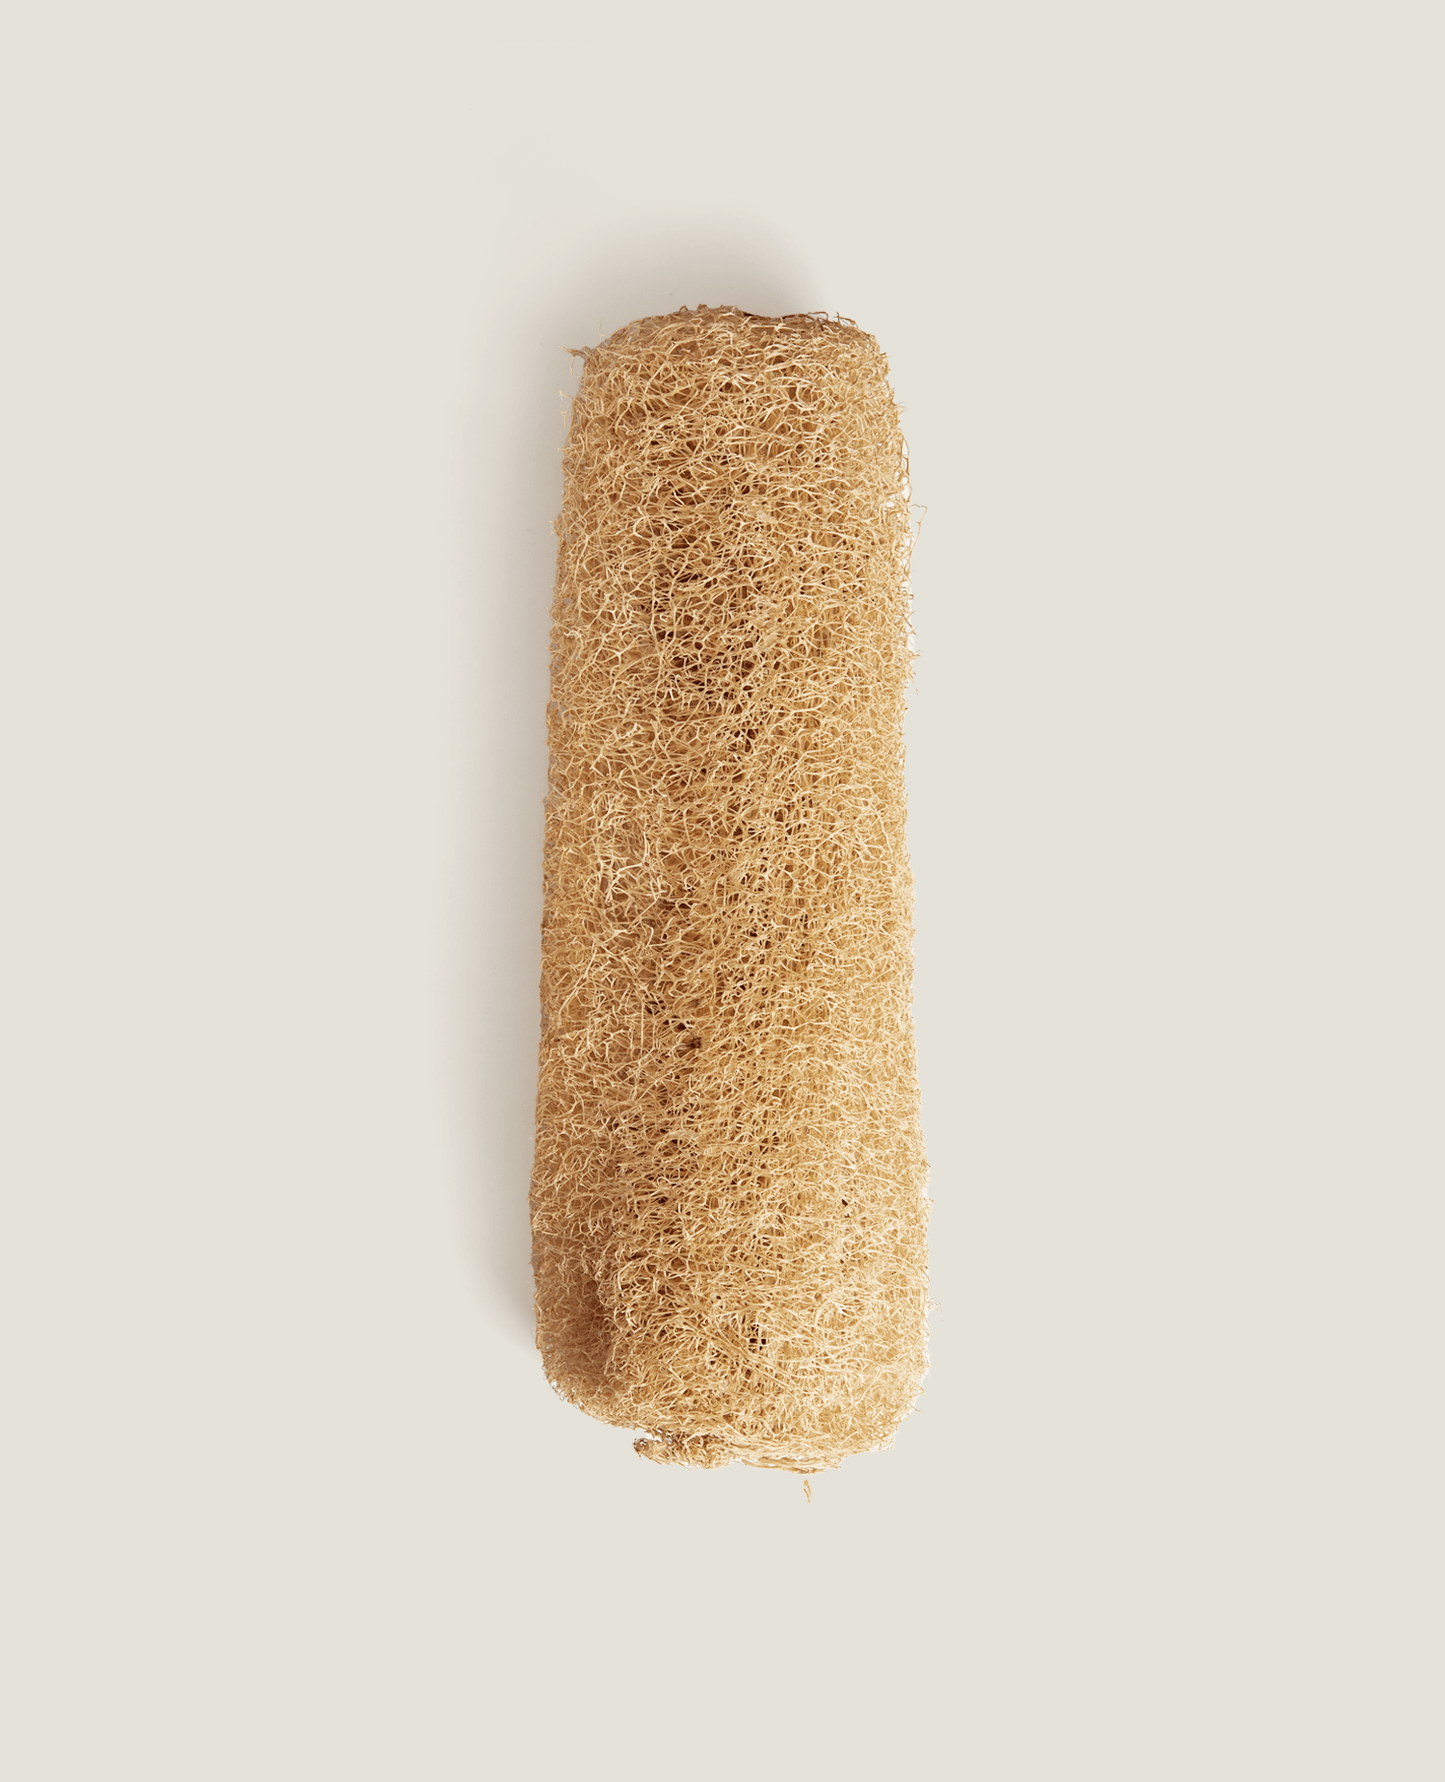 Unbleached Loofah